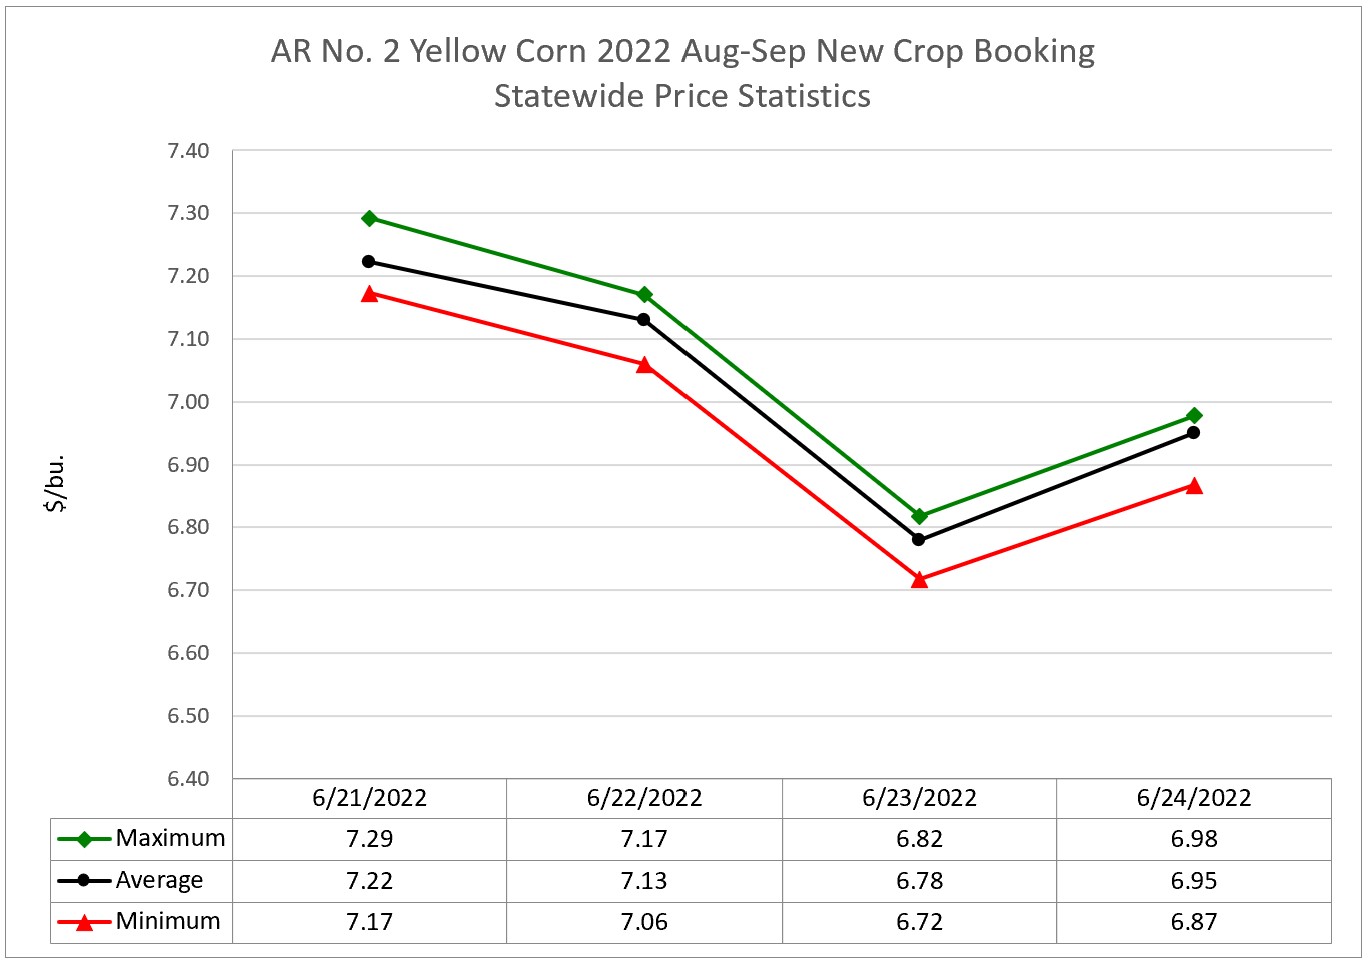 Arkansas 2022 New Crop Corn Booking Market Statistics (June 20 – 24, 2022)  - a line graph indicating the maximum, average, and minimum prices from 4 locations throughout the week.